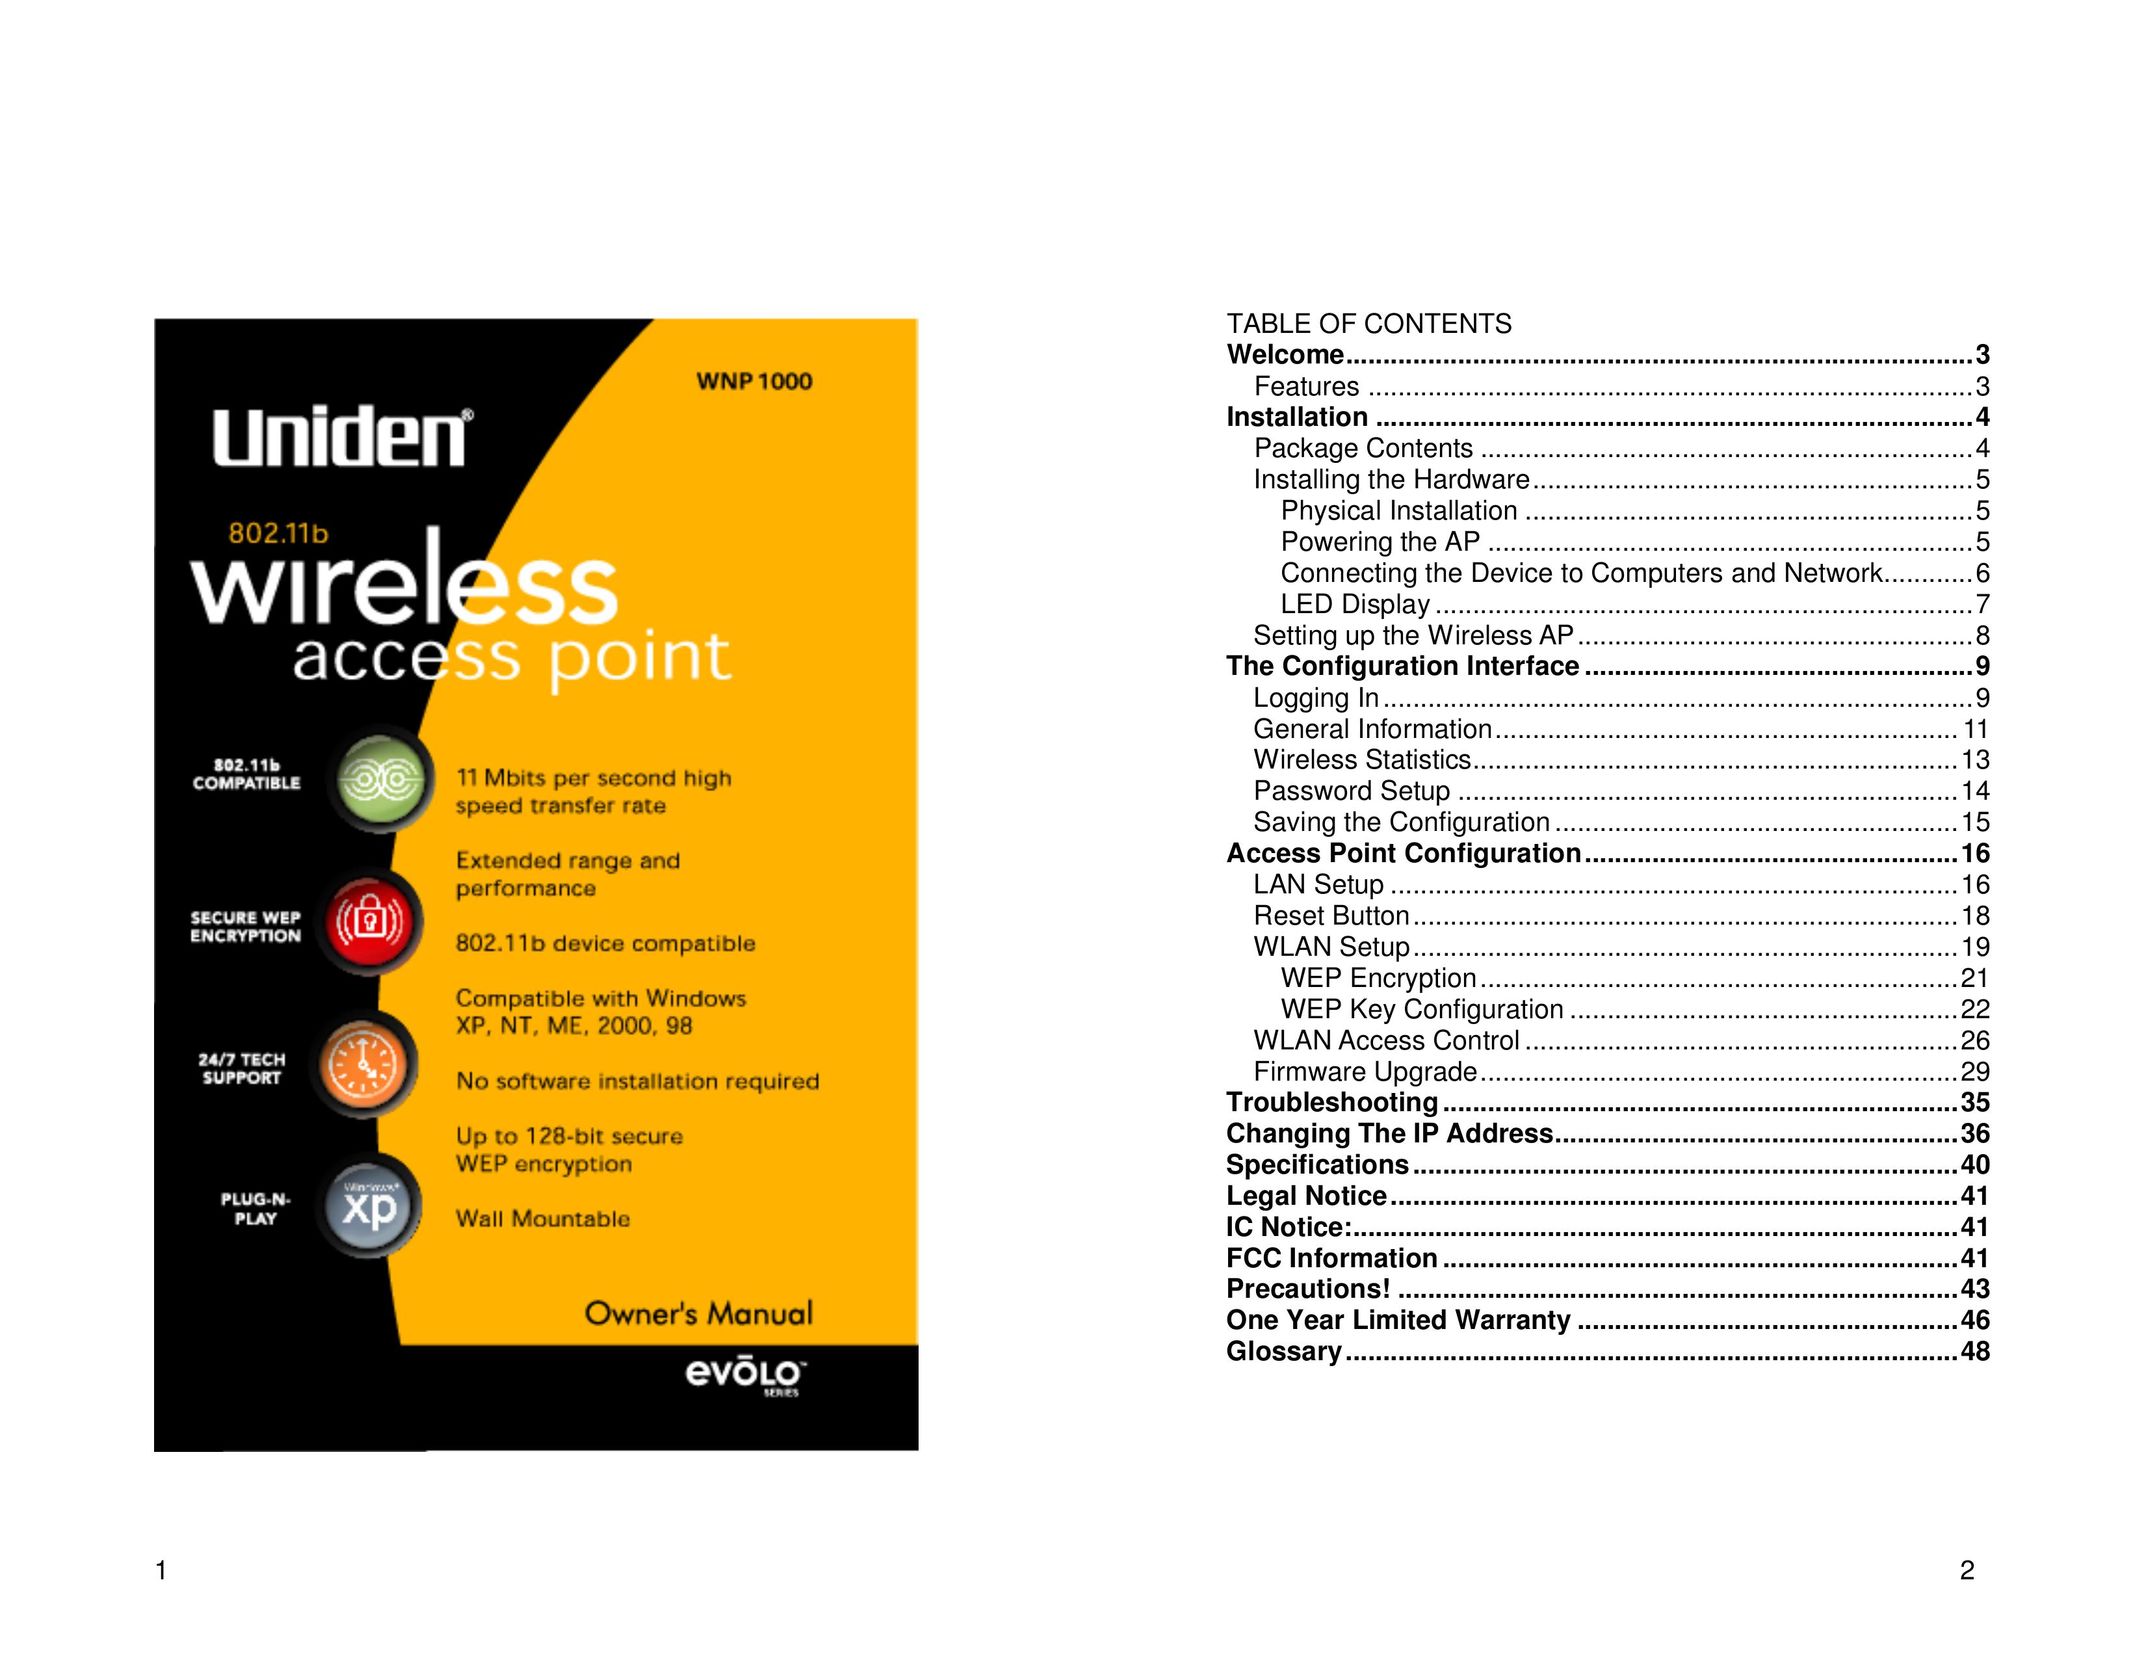 Uniden WNP1000 Network Card User Manual